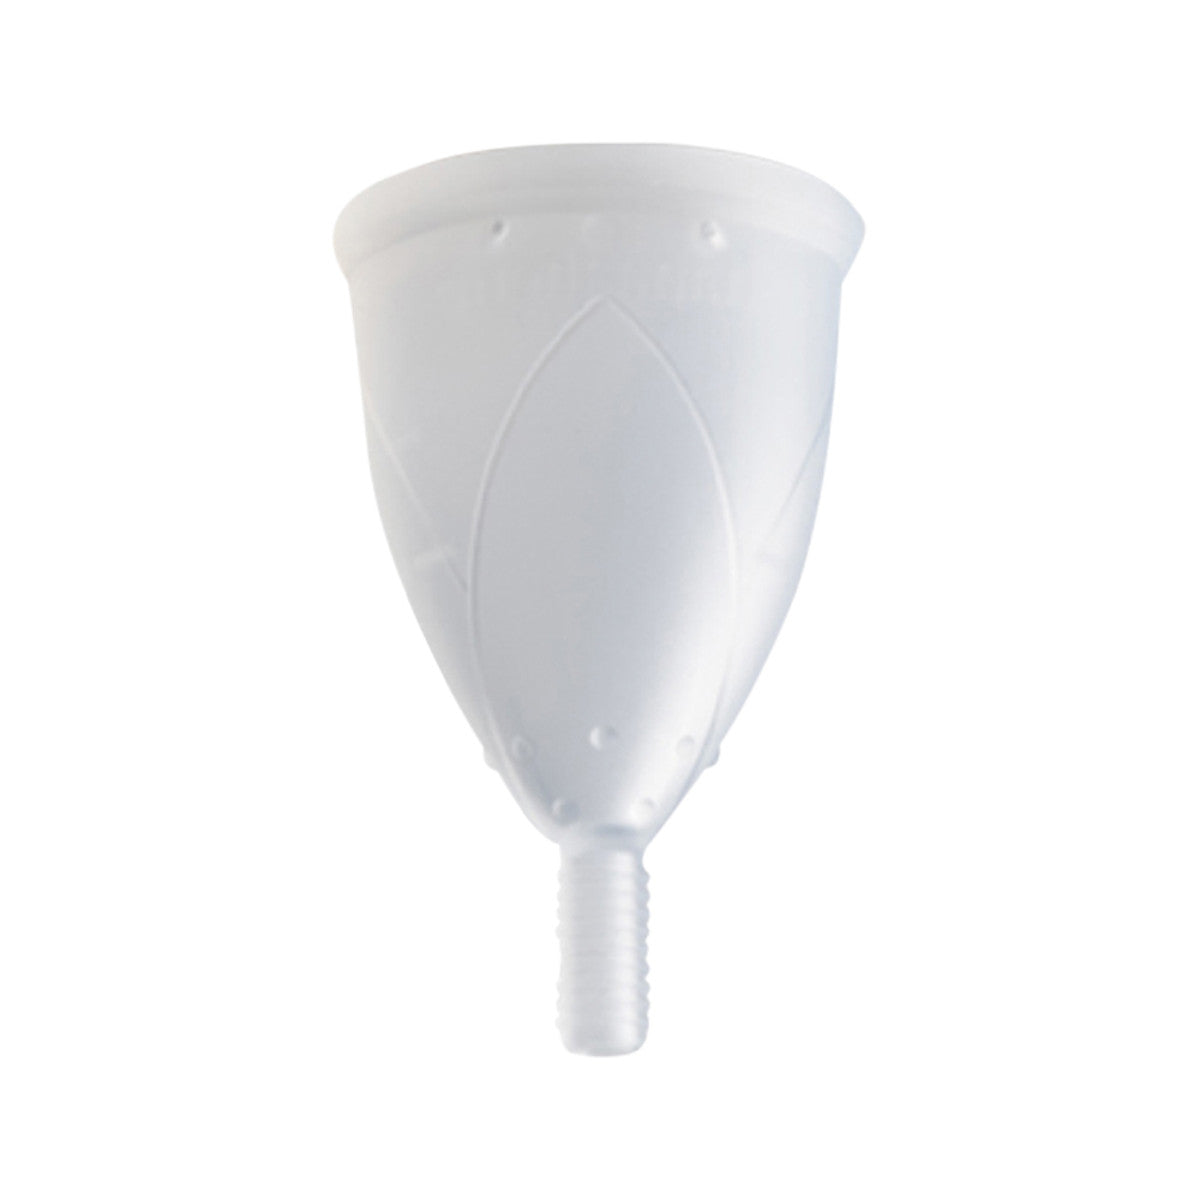 Hannah Menstrual Cup, Small Or Medium Size For A Healthy You